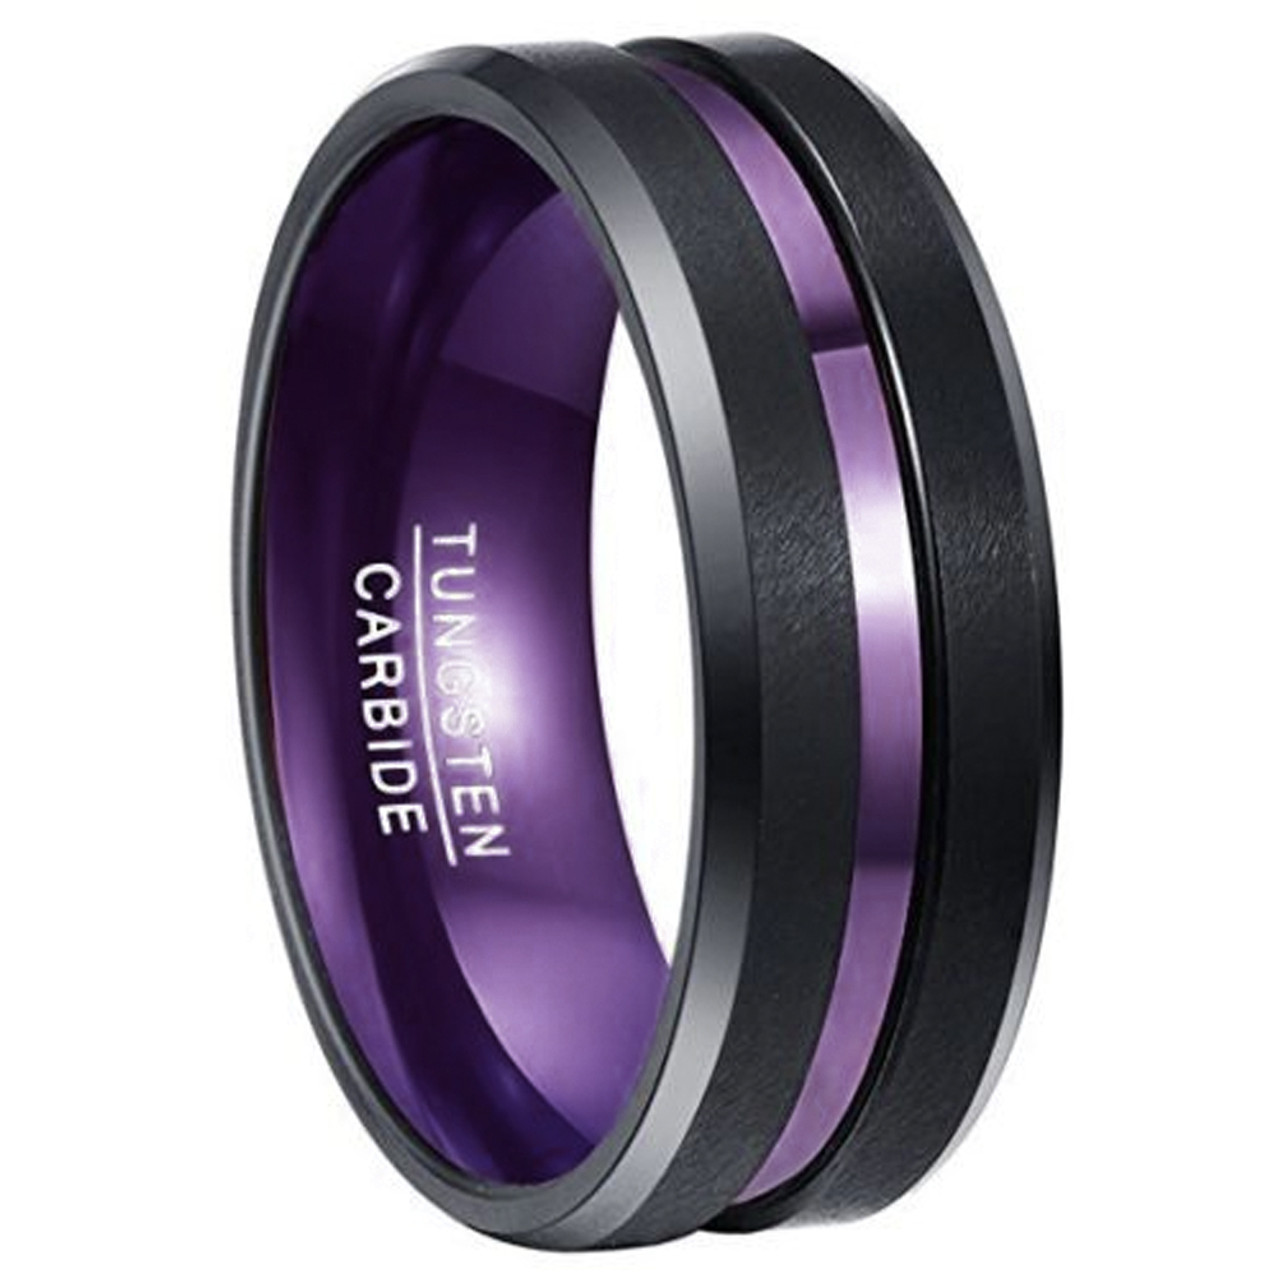 8mm - Unisex or Men's Wedding Tungsten Band. Black Matte Finish Tungsten Carbide Ring with Double Purple Tone. Beveled Edge